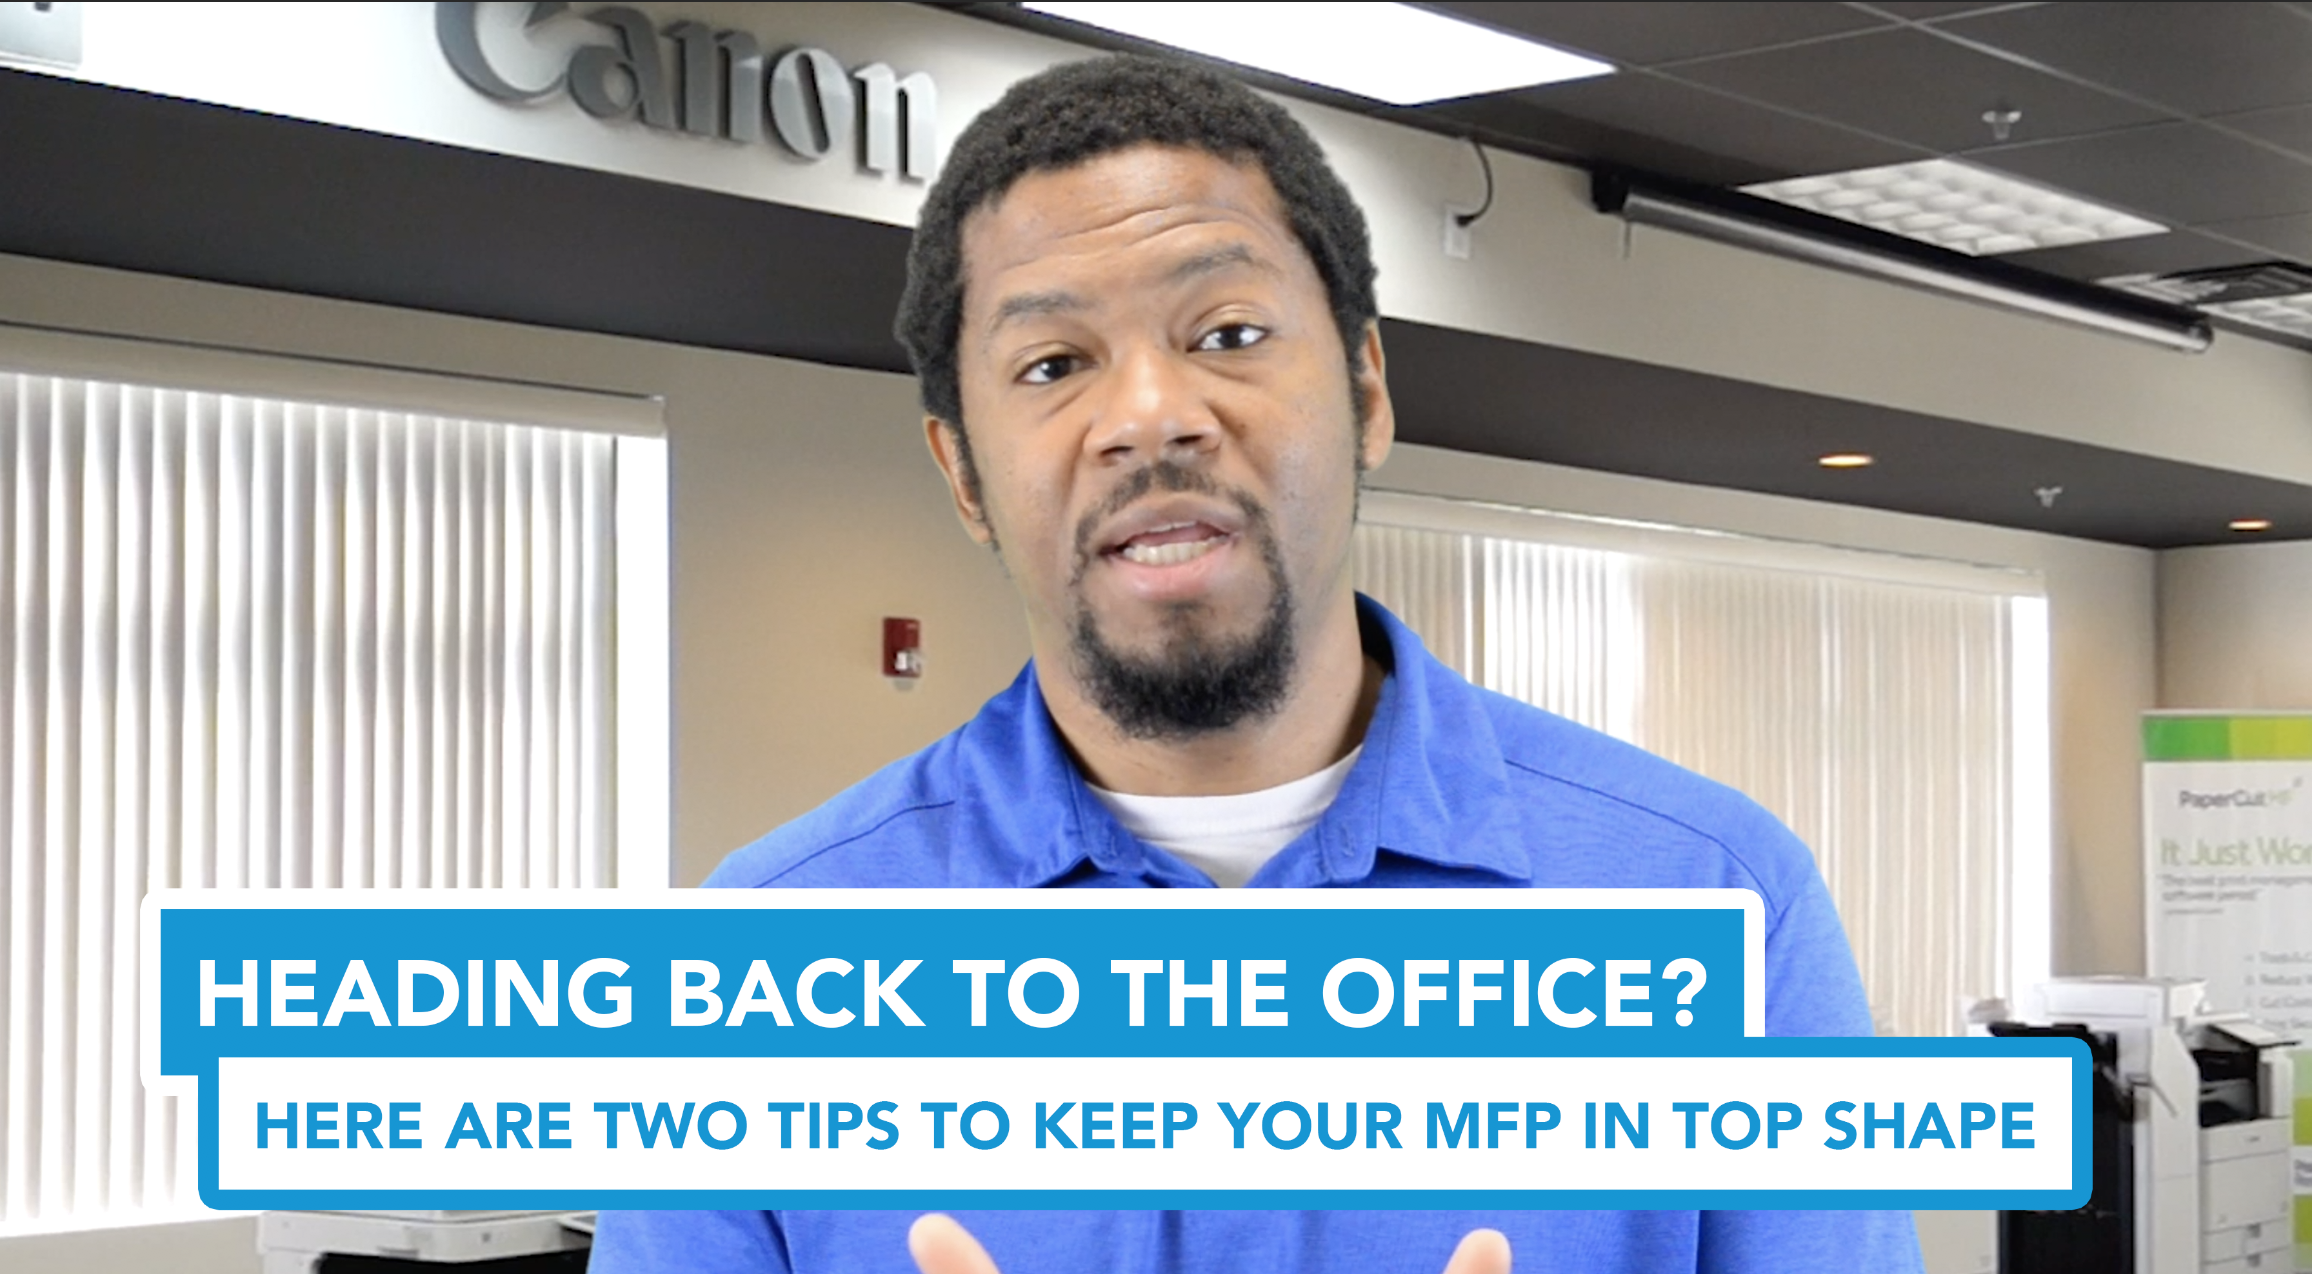 Heading Back to the Office? Here Are Two Tips to Keep Your MFP in Top Shape